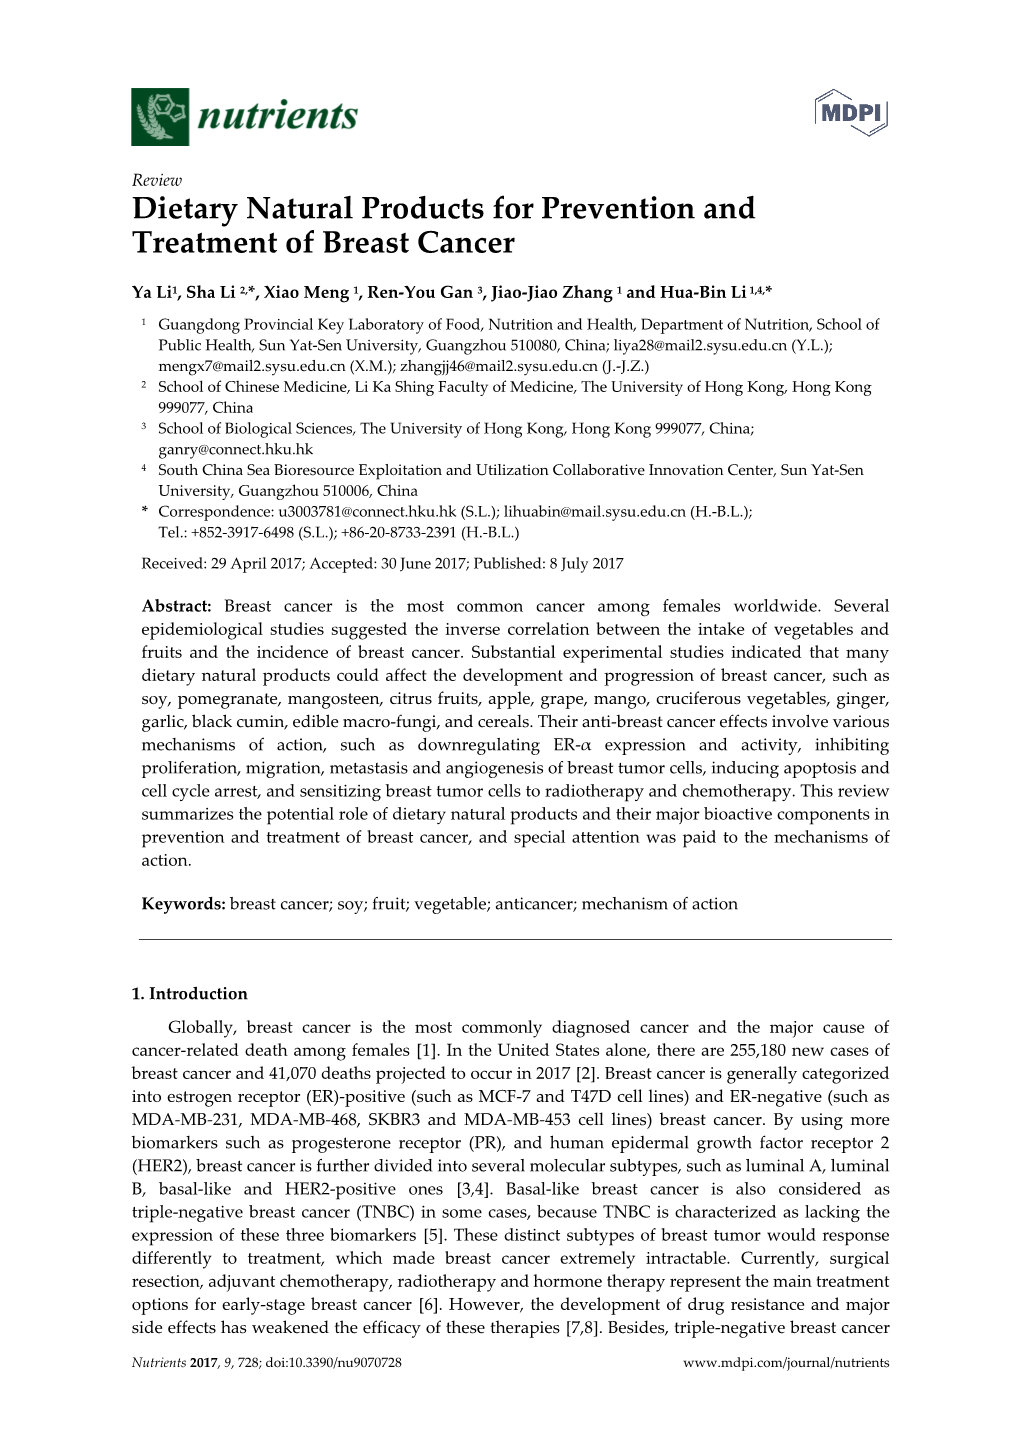 Dietary Natural Products for Prevention and Treatment of Breast Cancer